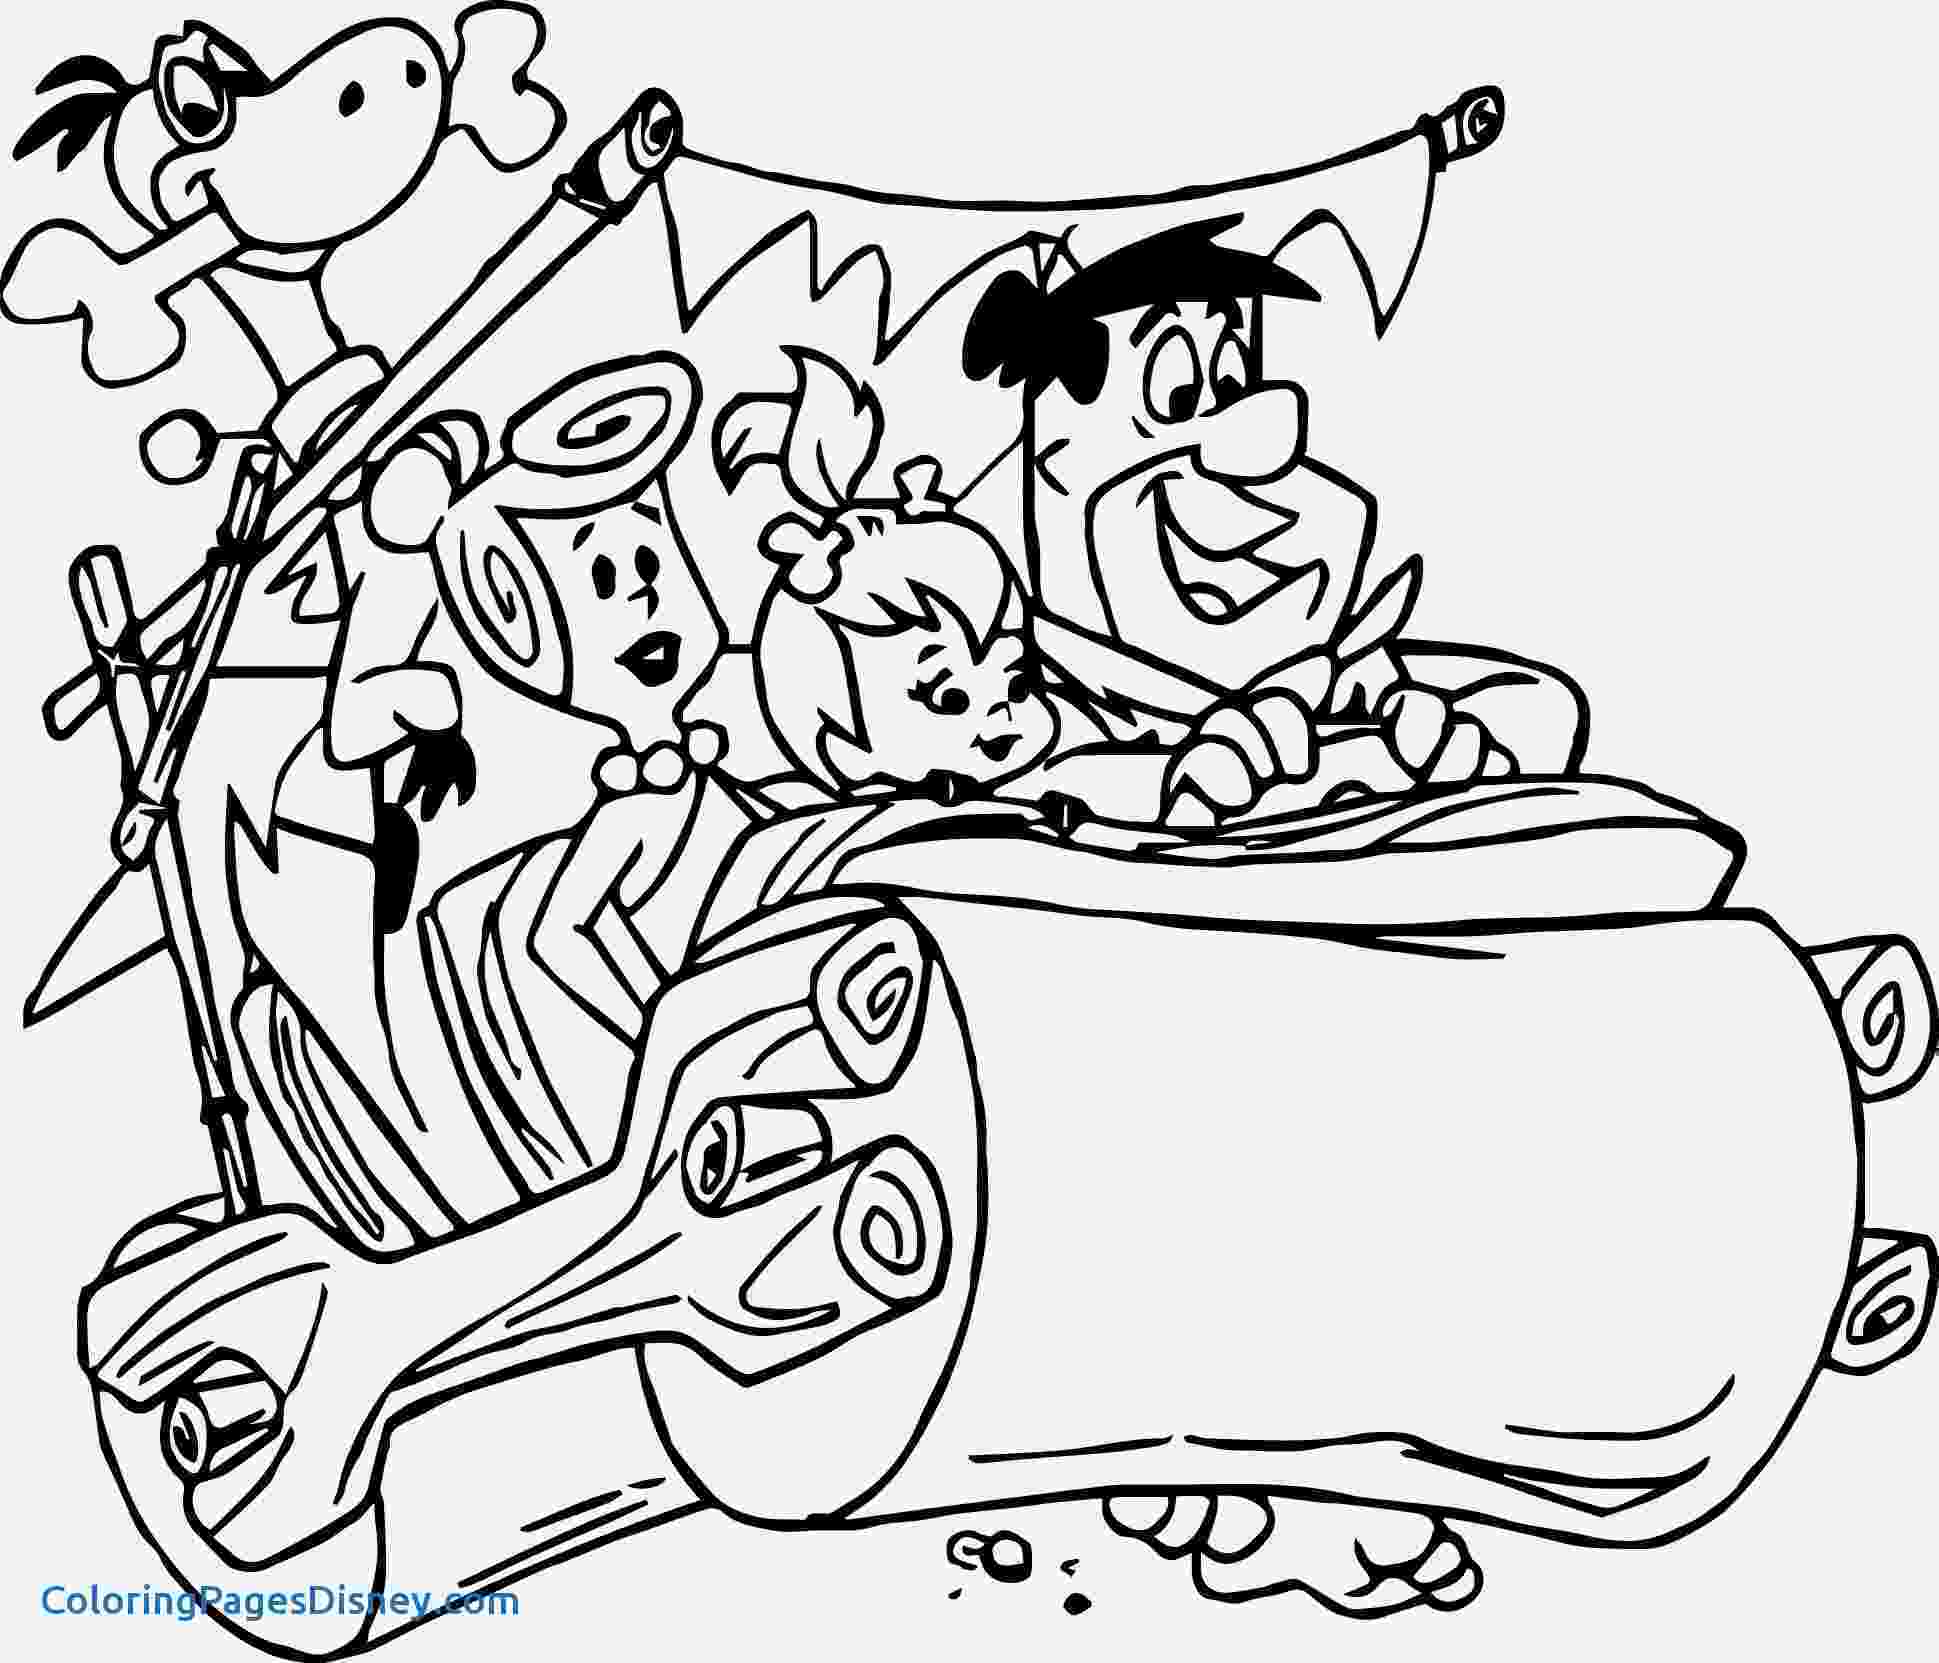 wizards of waverly place coloring pages wizards coloring pages coloring pages waverly pages coloring of place wizards 